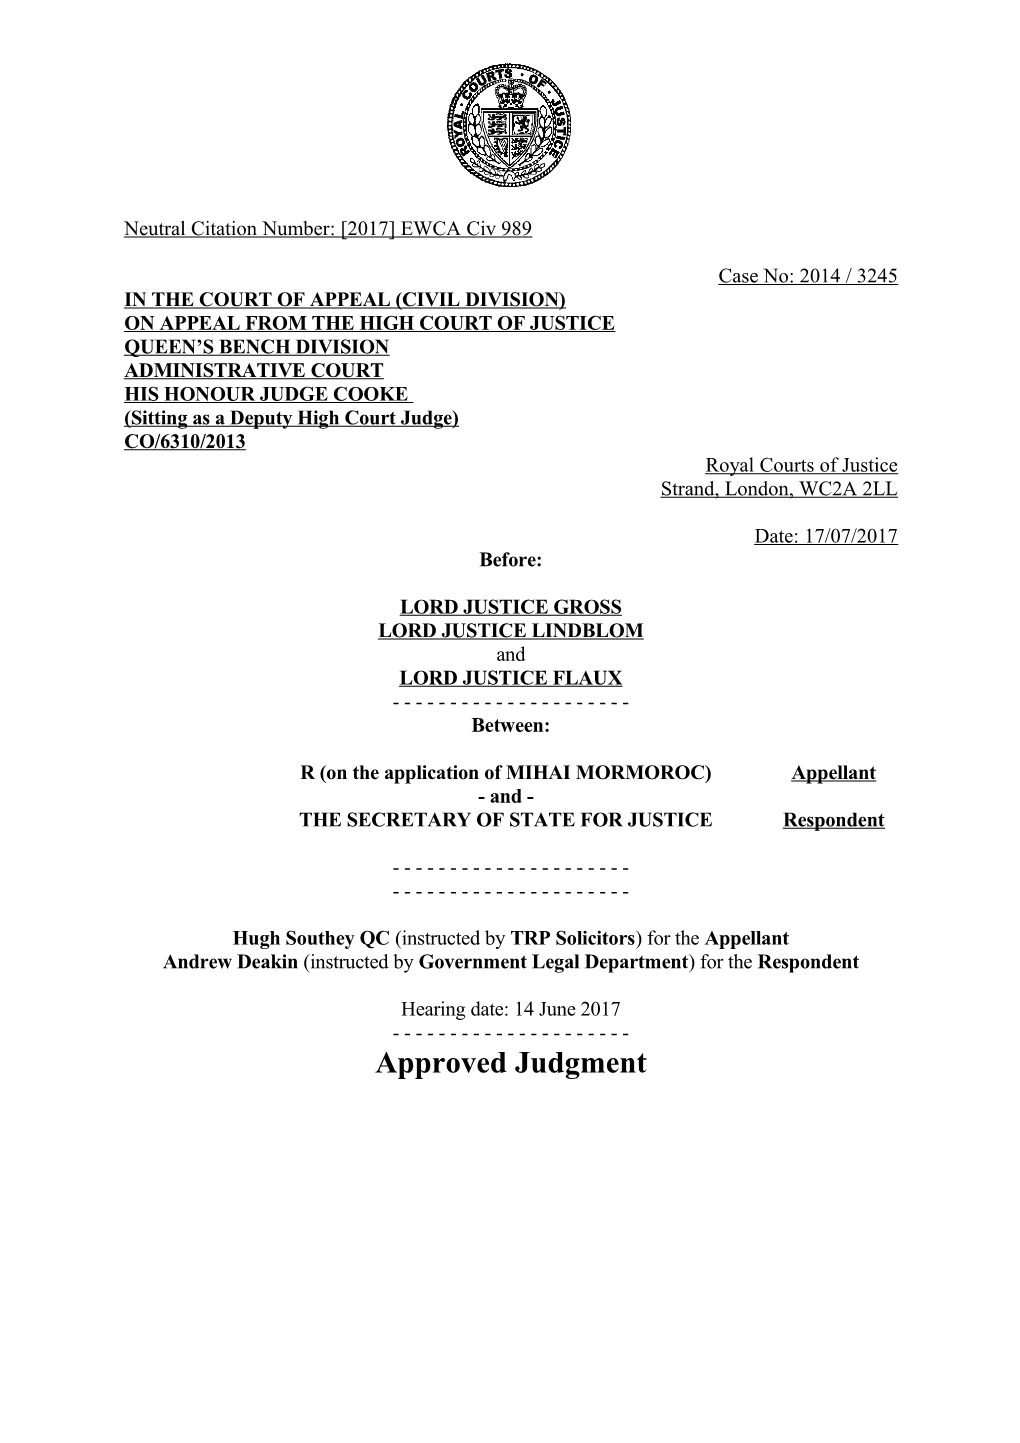 Court of Appeal Judgment Template s1